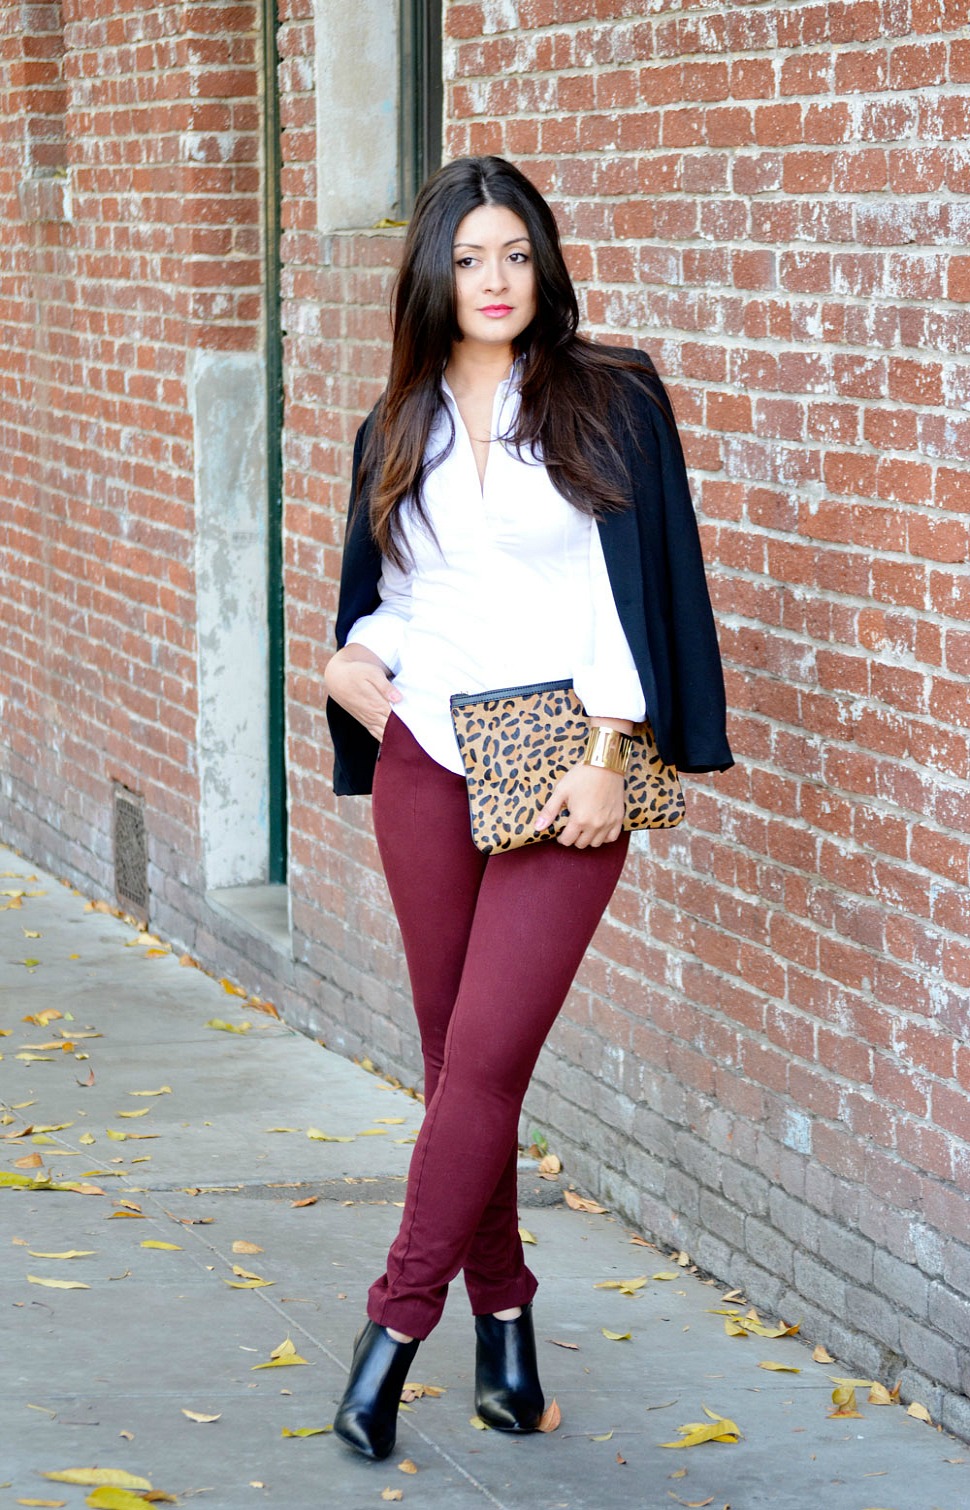 oxblood and animal print for fall